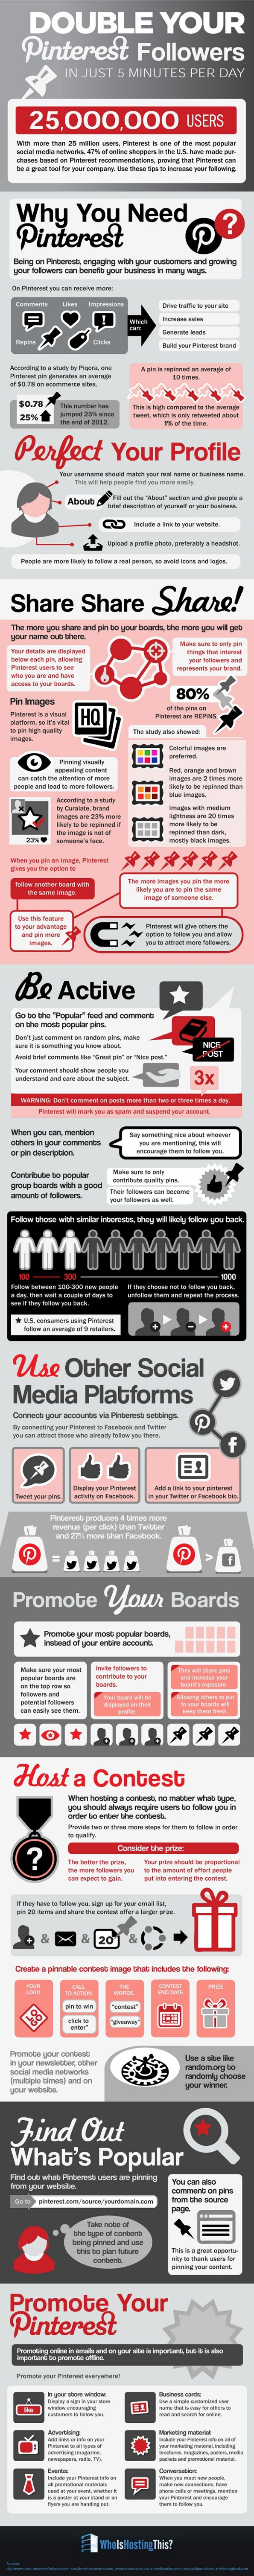 Pinterest for Business: How to Double Your Followers Infographic image